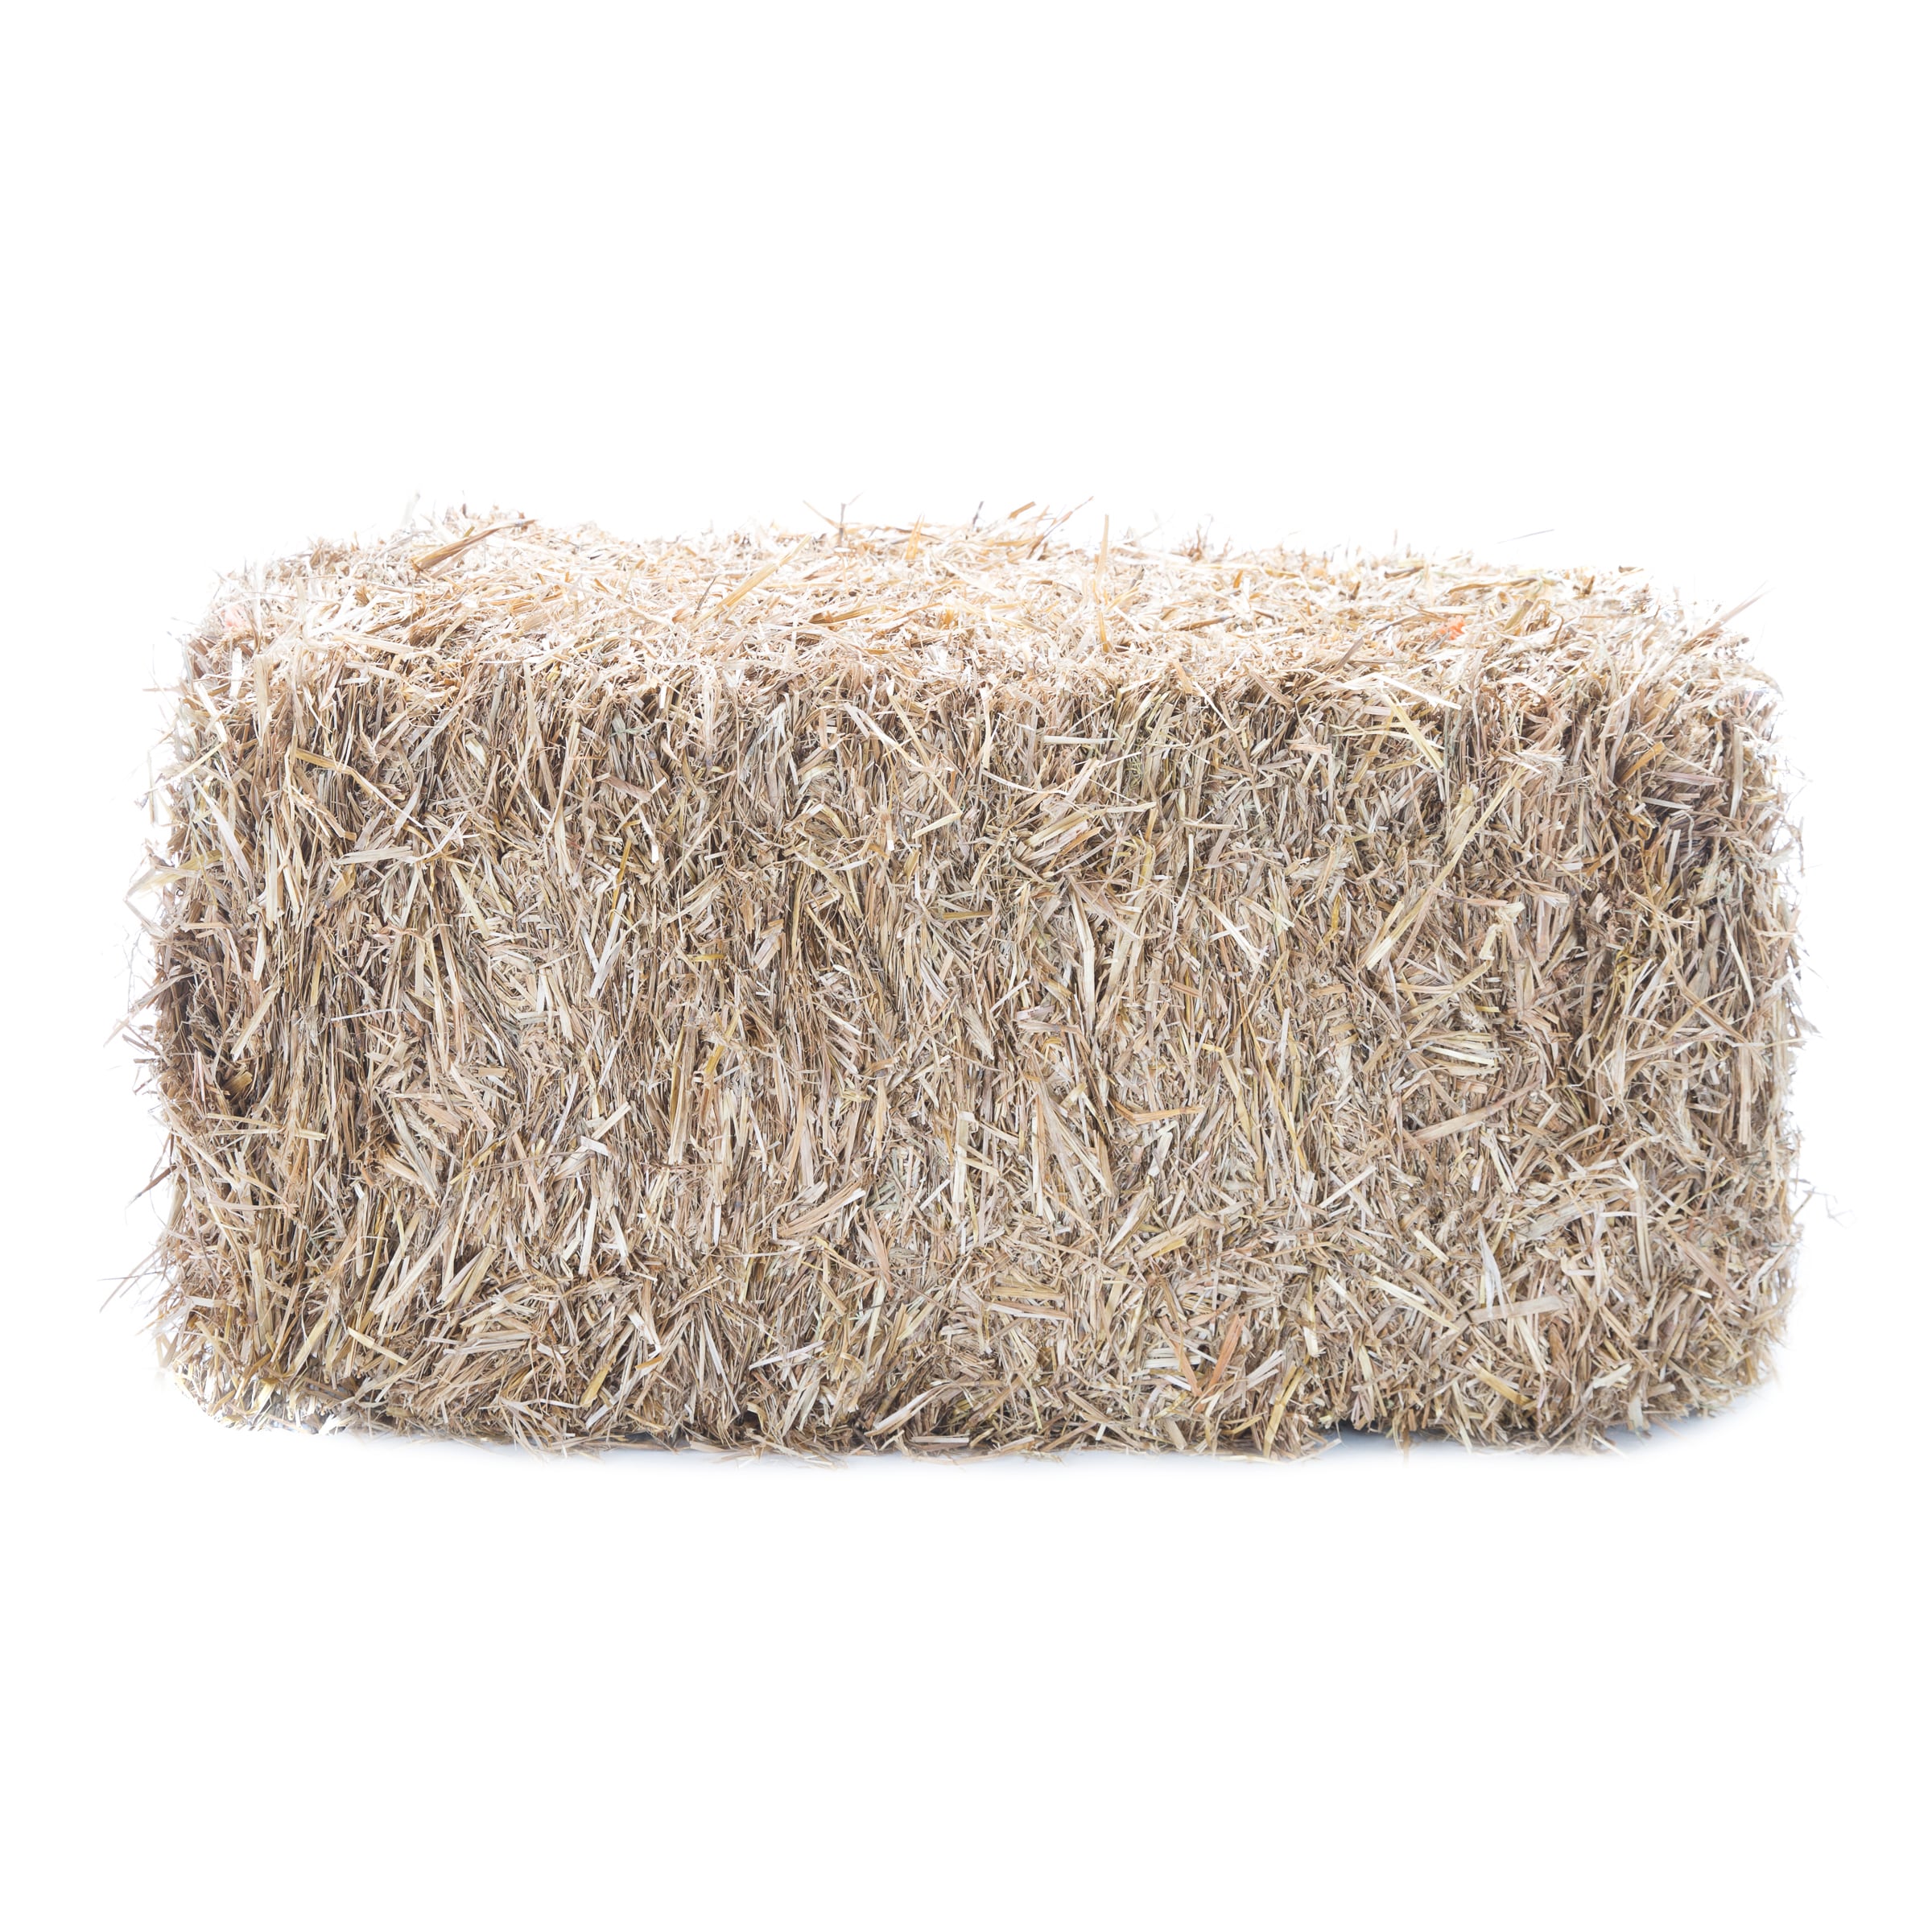 Wheat Straw 80 sq. ft. (at 3-in to 4-in depth) in the Pine Needles & Straw  Mulch department at